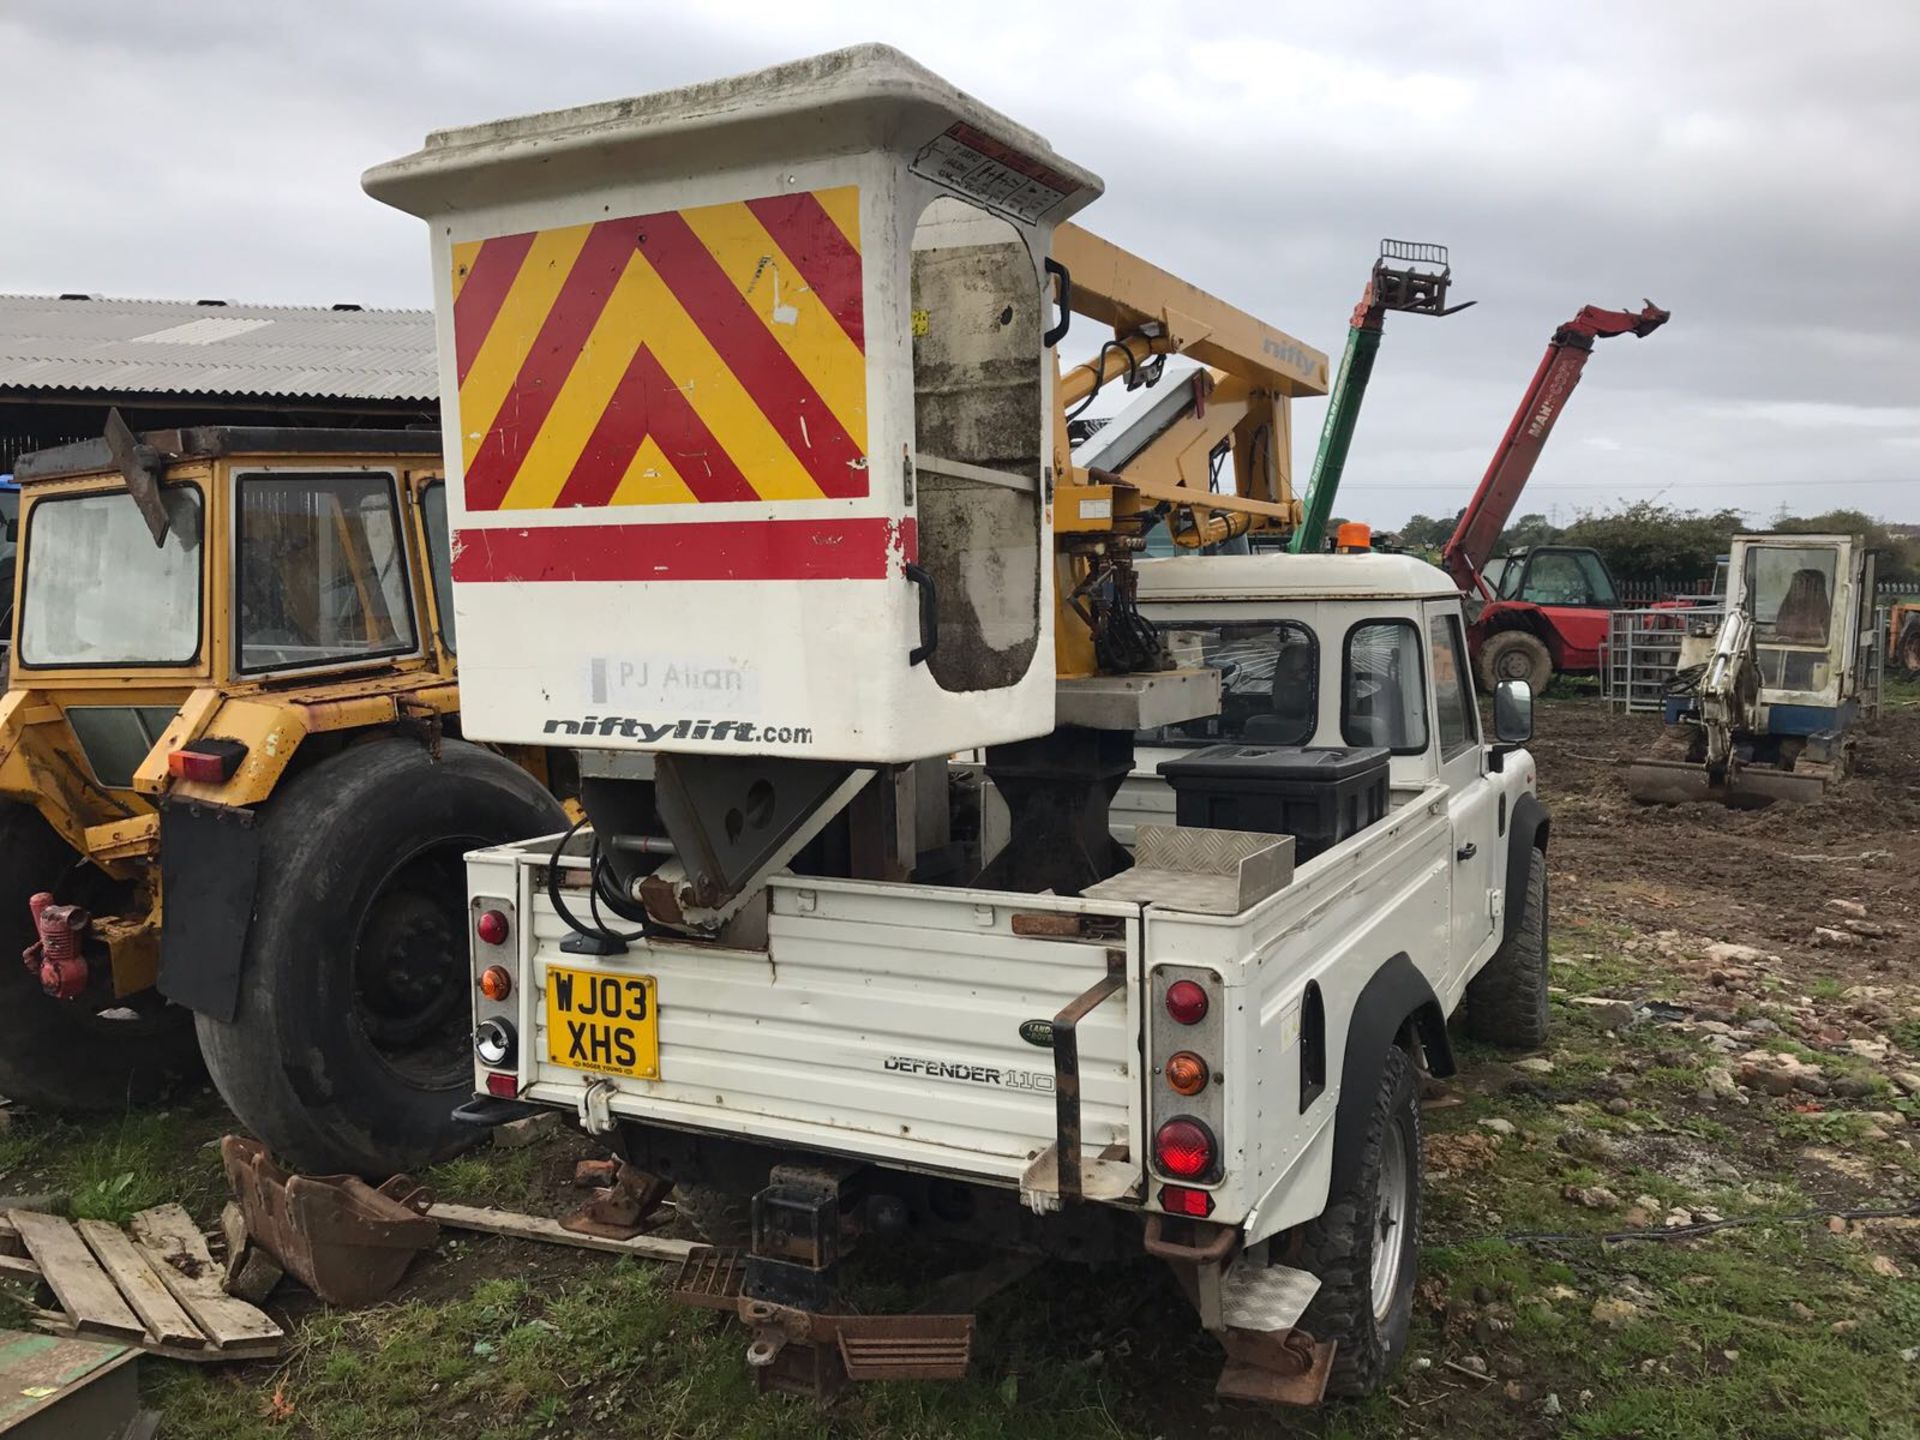 2003/03 REG WHITE LAND ROVER DEFENDER 110 4X4 TD5 WITH NIFTY LIFT CHERRY PICKER *PLUS VAT* - Image 4 of 5